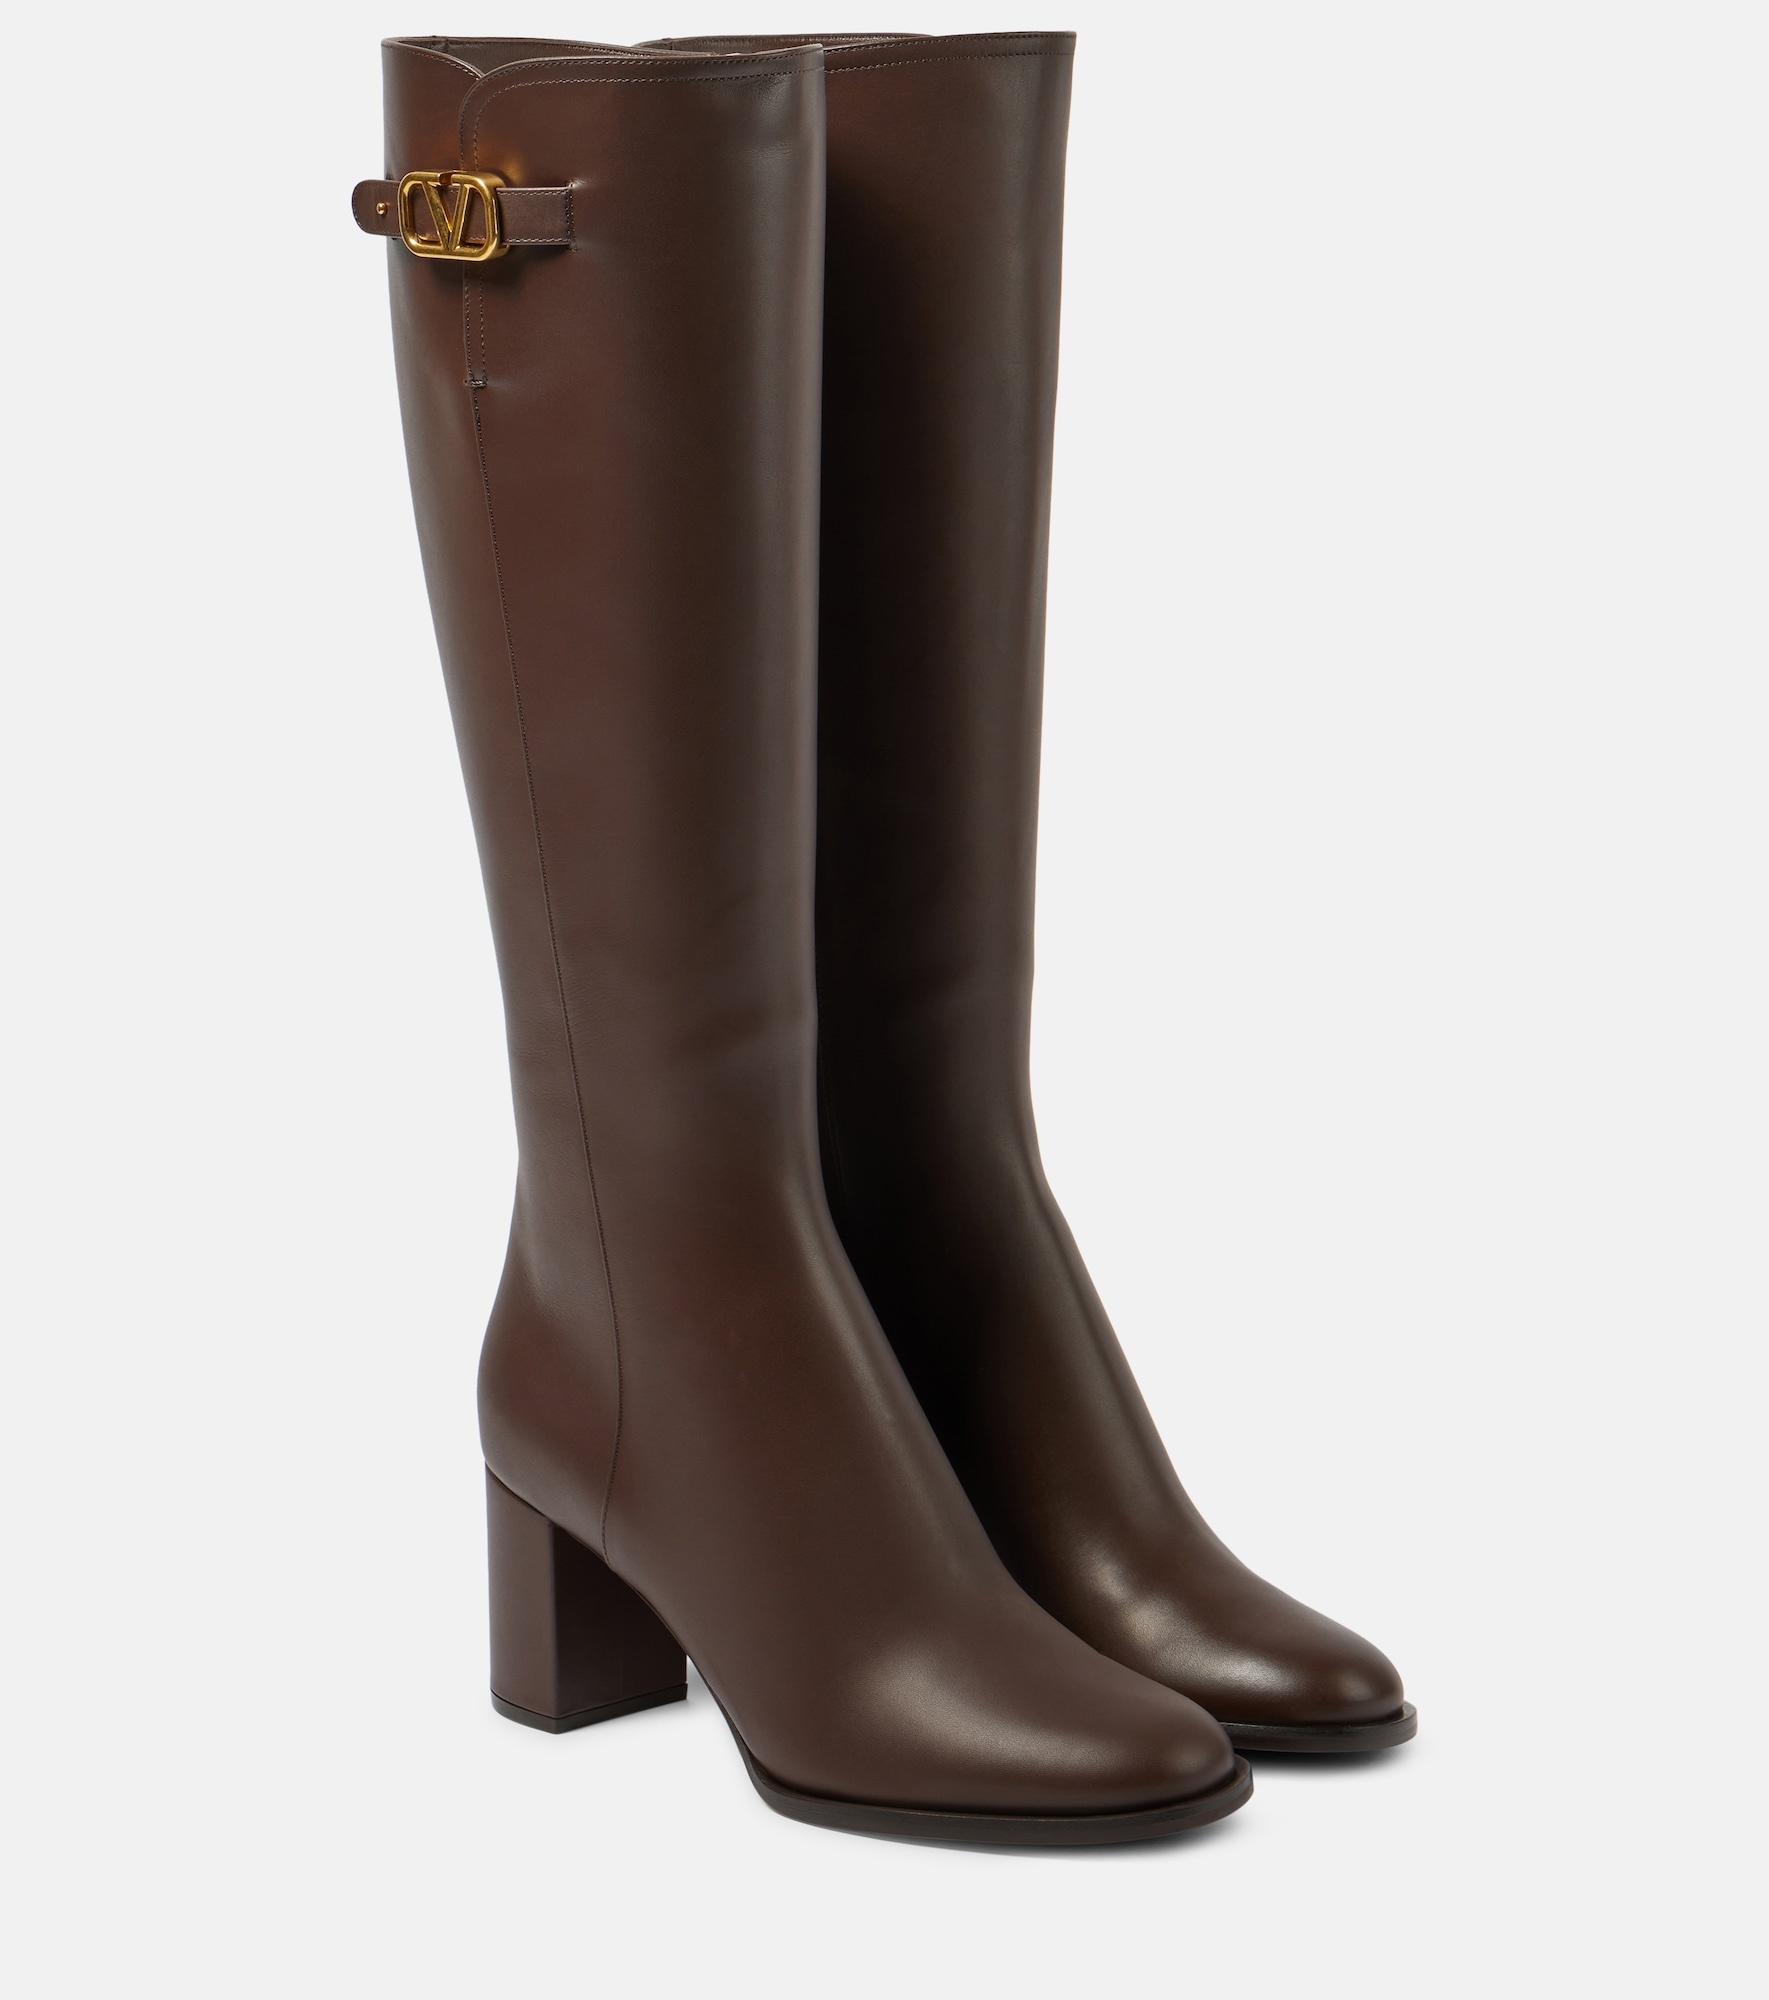 VLogo Signature leather knee-high boots - 1